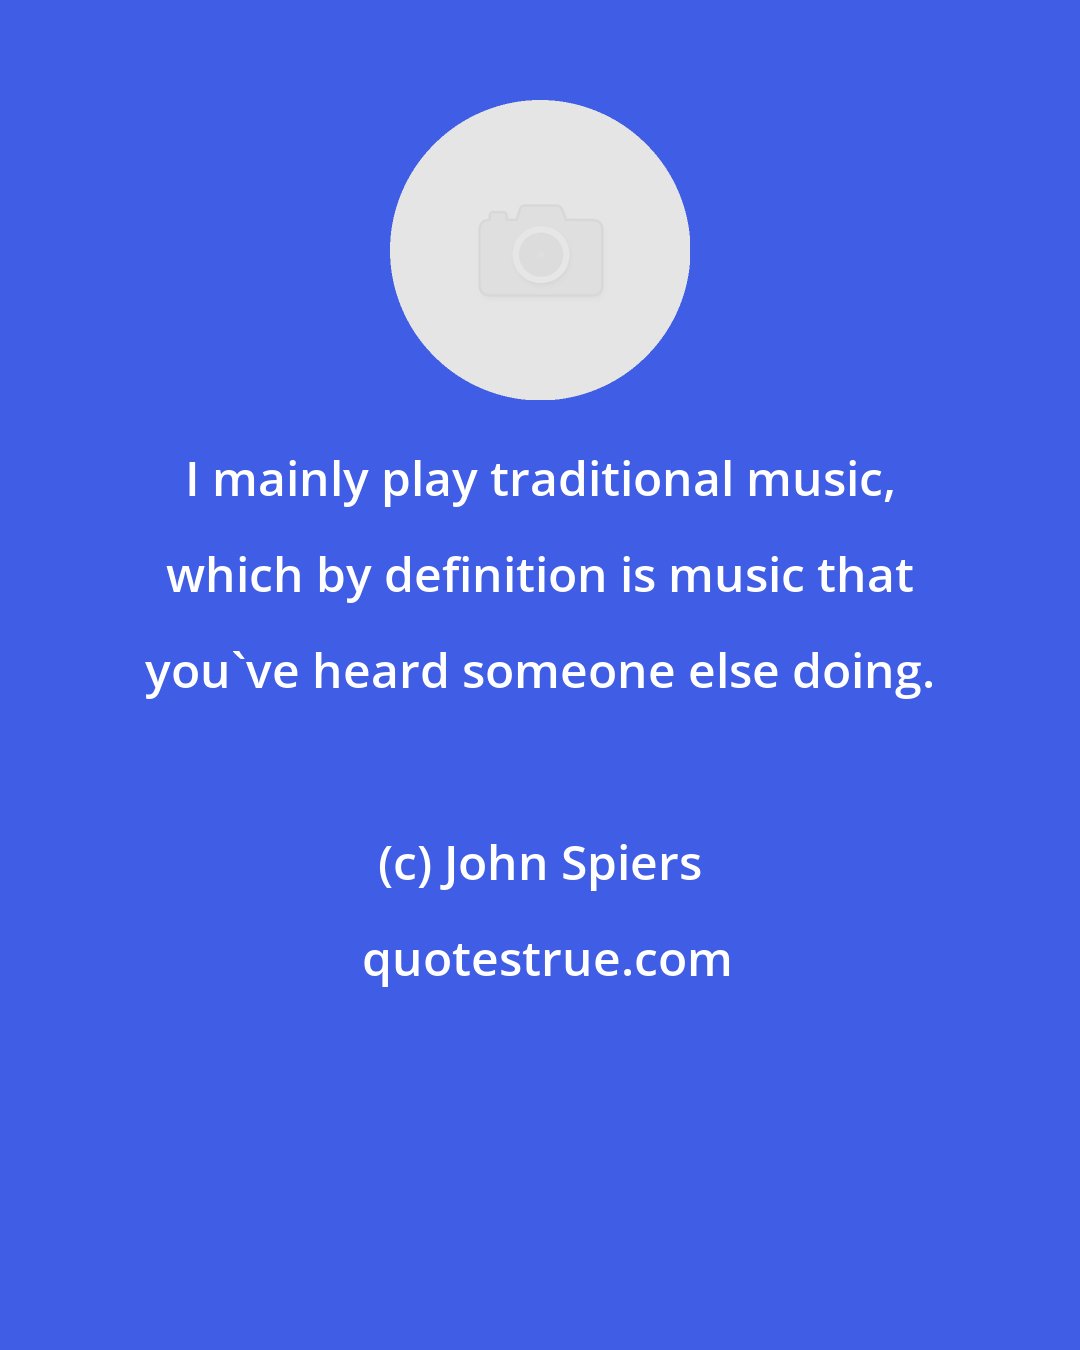 John Spiers: I mainly play traditional music, which by definition is music that you've heard someone else doing.